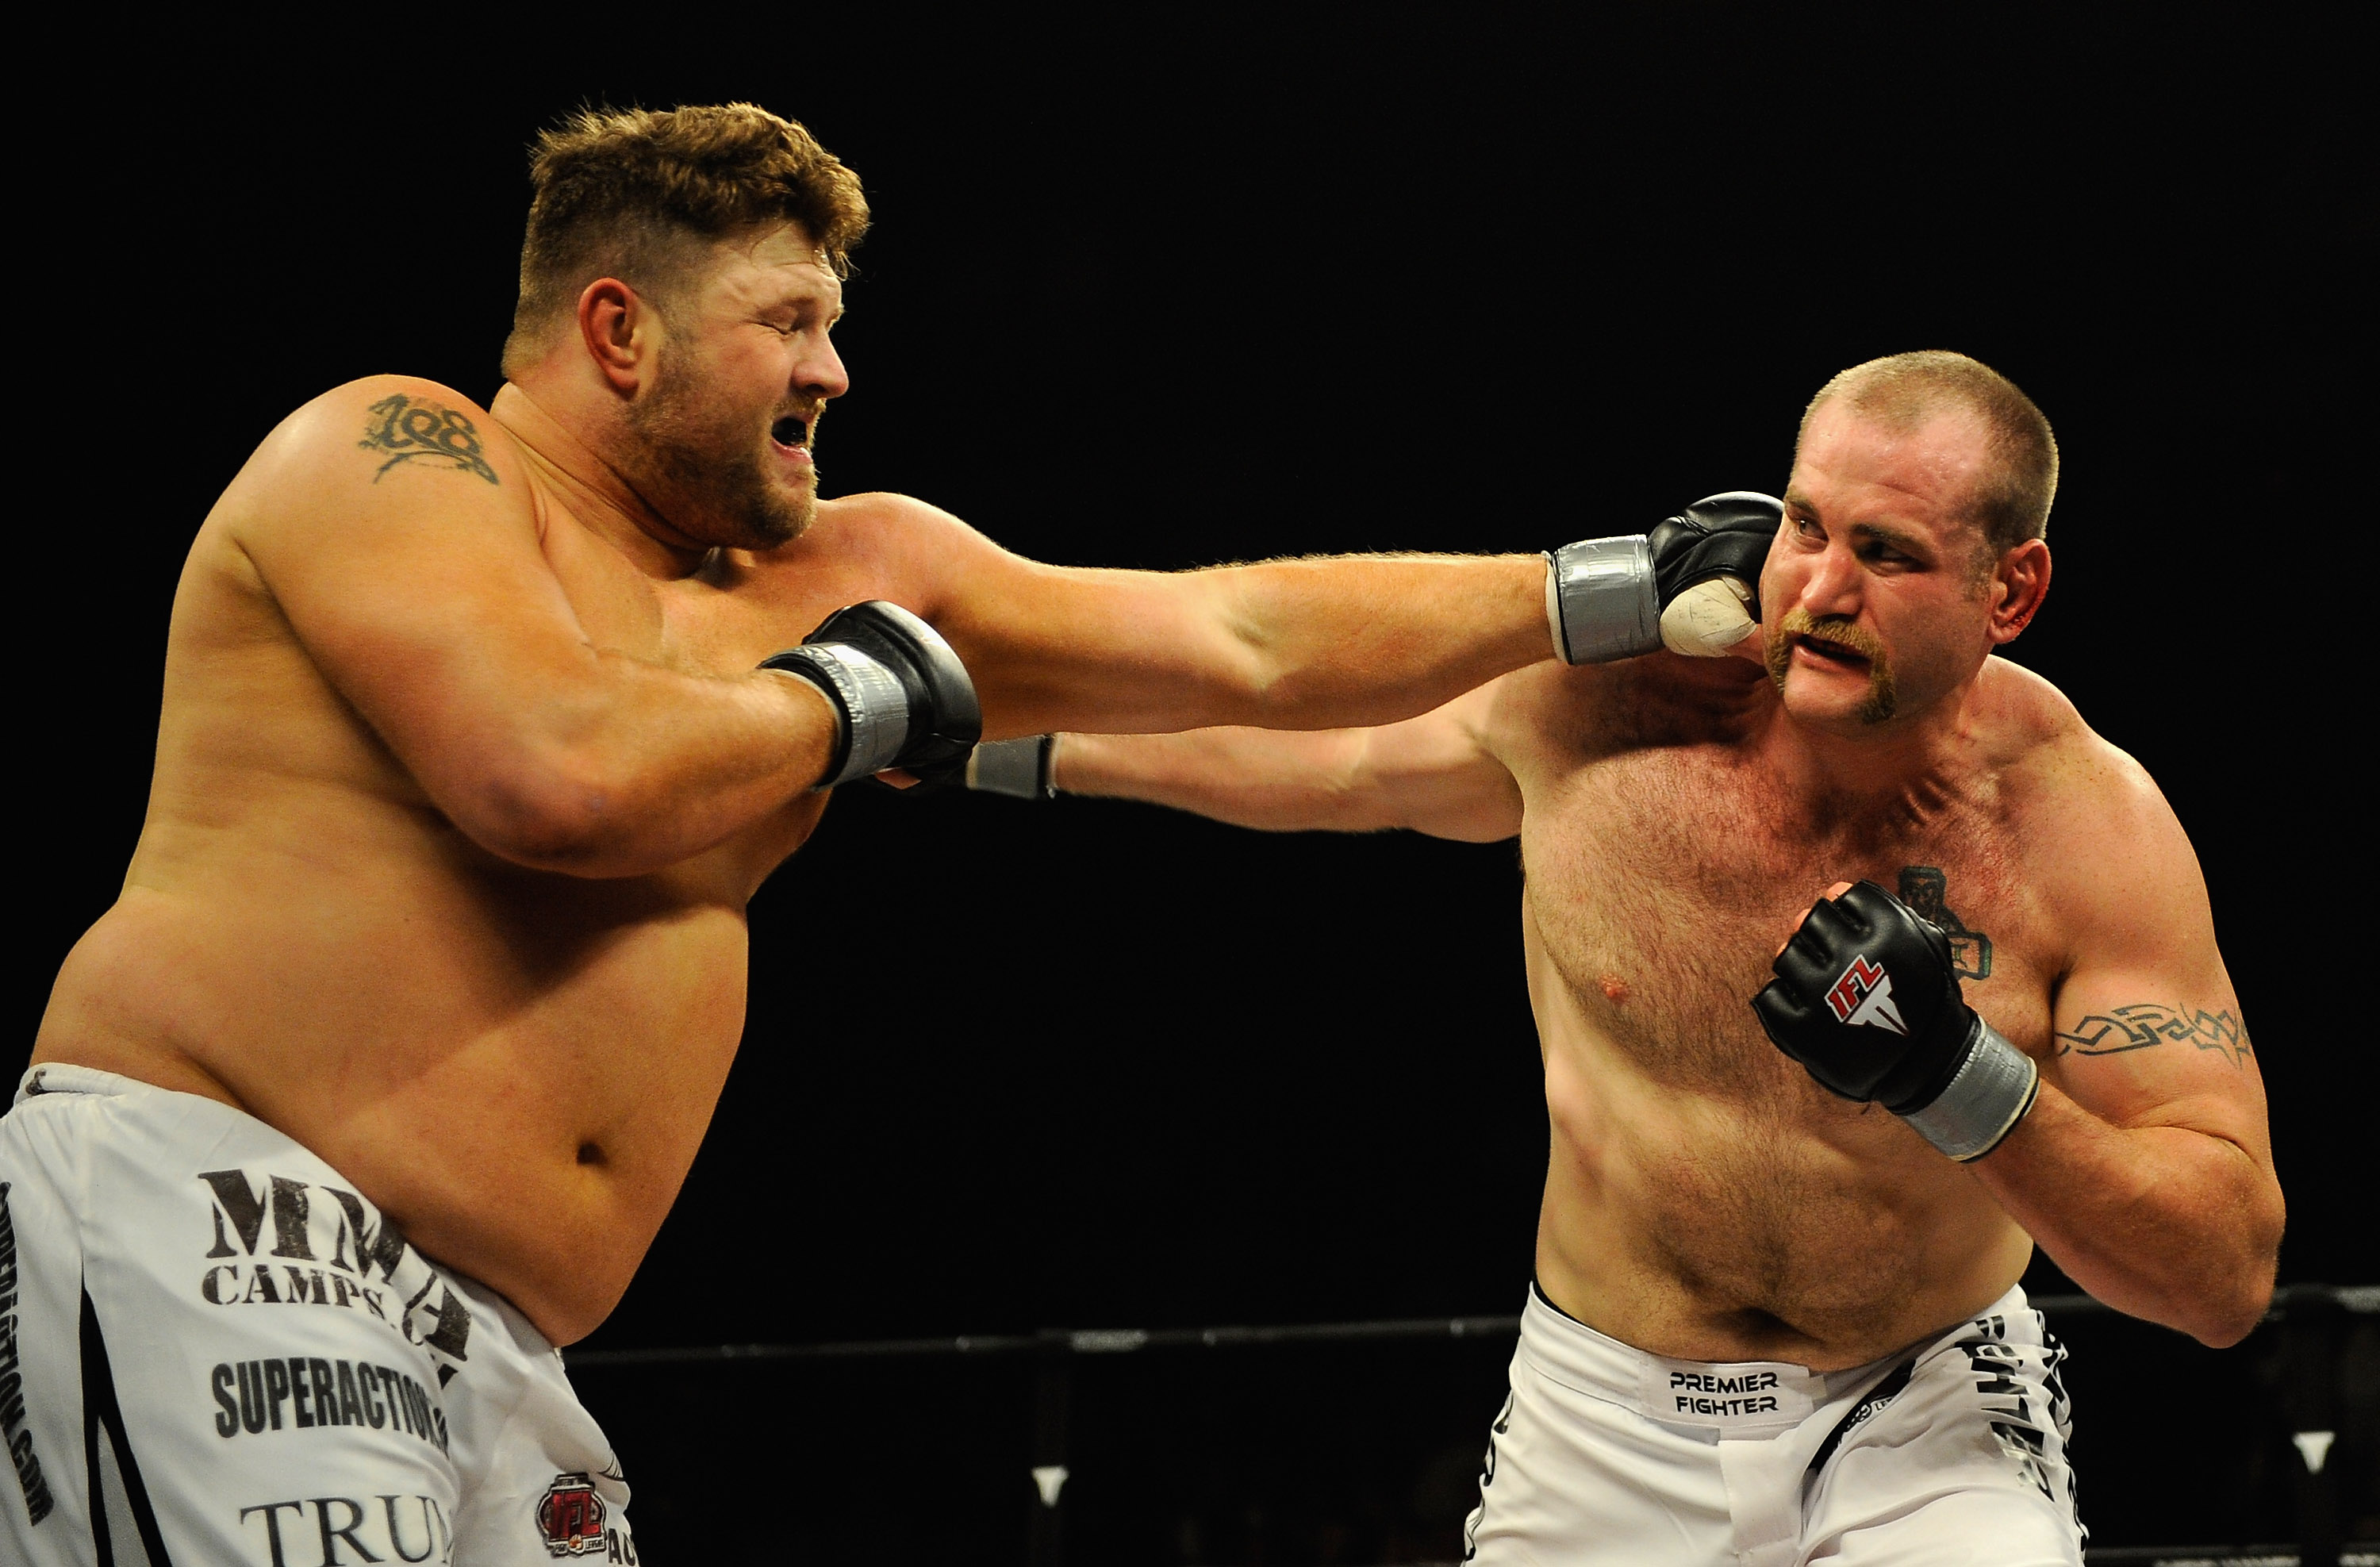 UNCASVILLE, CT - MAY 16:  Roy Nelson (L) of the Lions Den throws a punch at Brad Imes (R) MilesTech Fighting System during their bout presented by the International Fighting League at the Mohegan Sun Arena May 16, 2008 in Uncasville, Connecticut.  (Photo